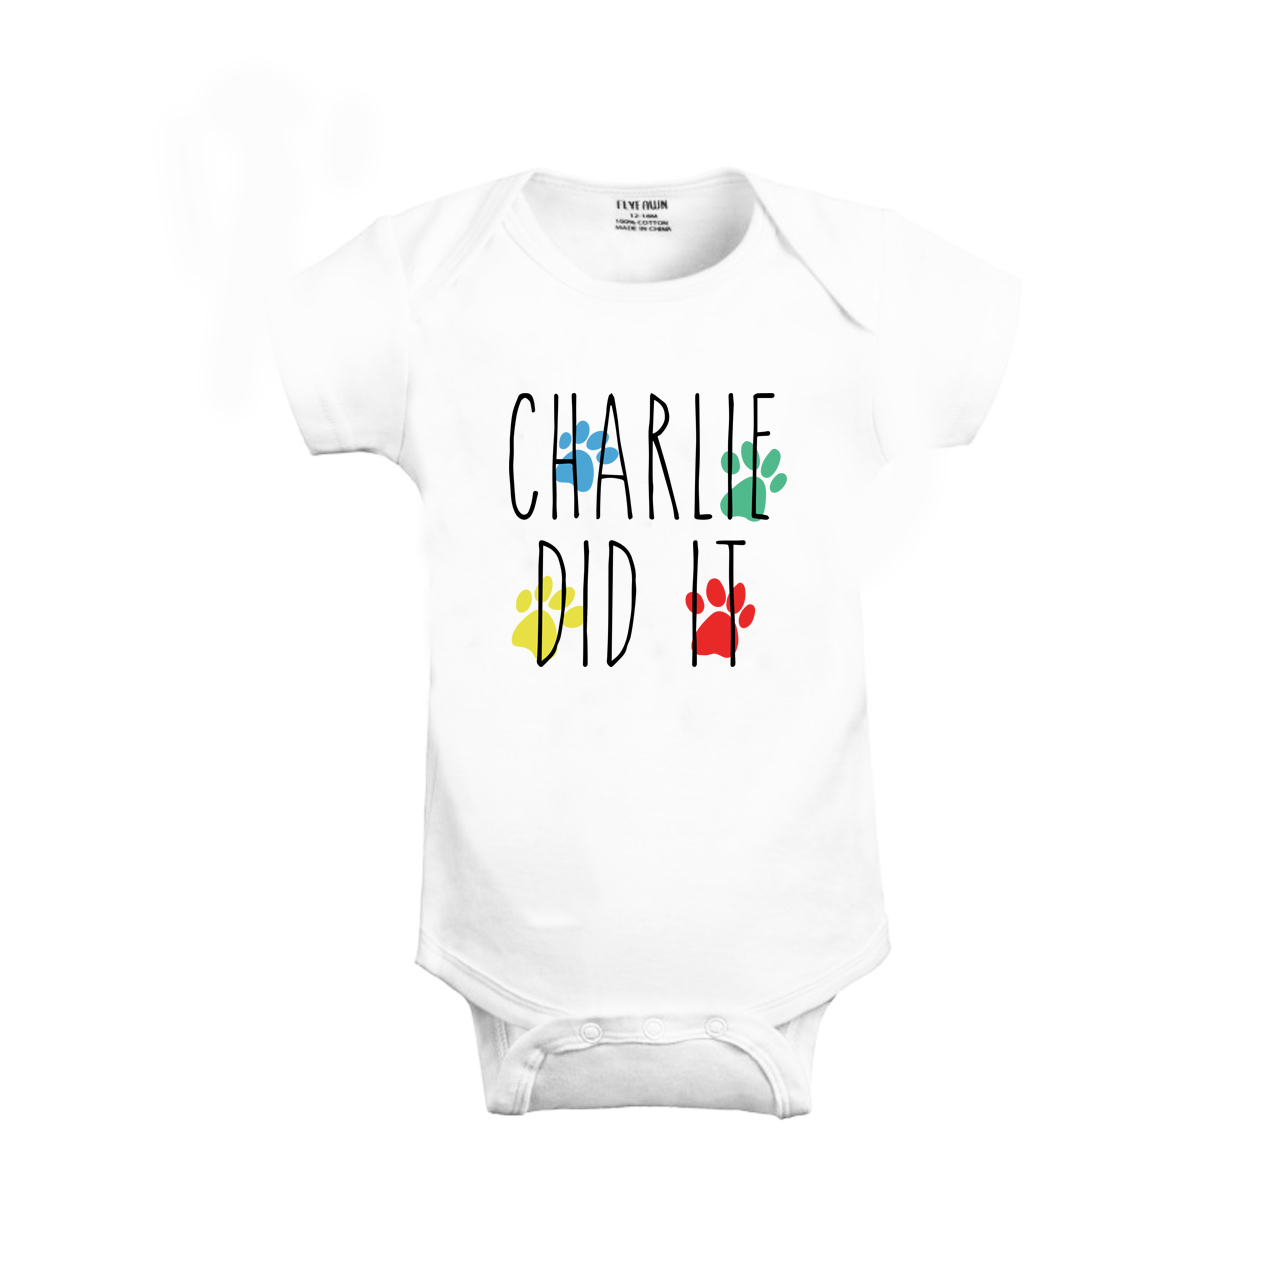 The Dog Did It Baby Bodysuit & T-Shirt 